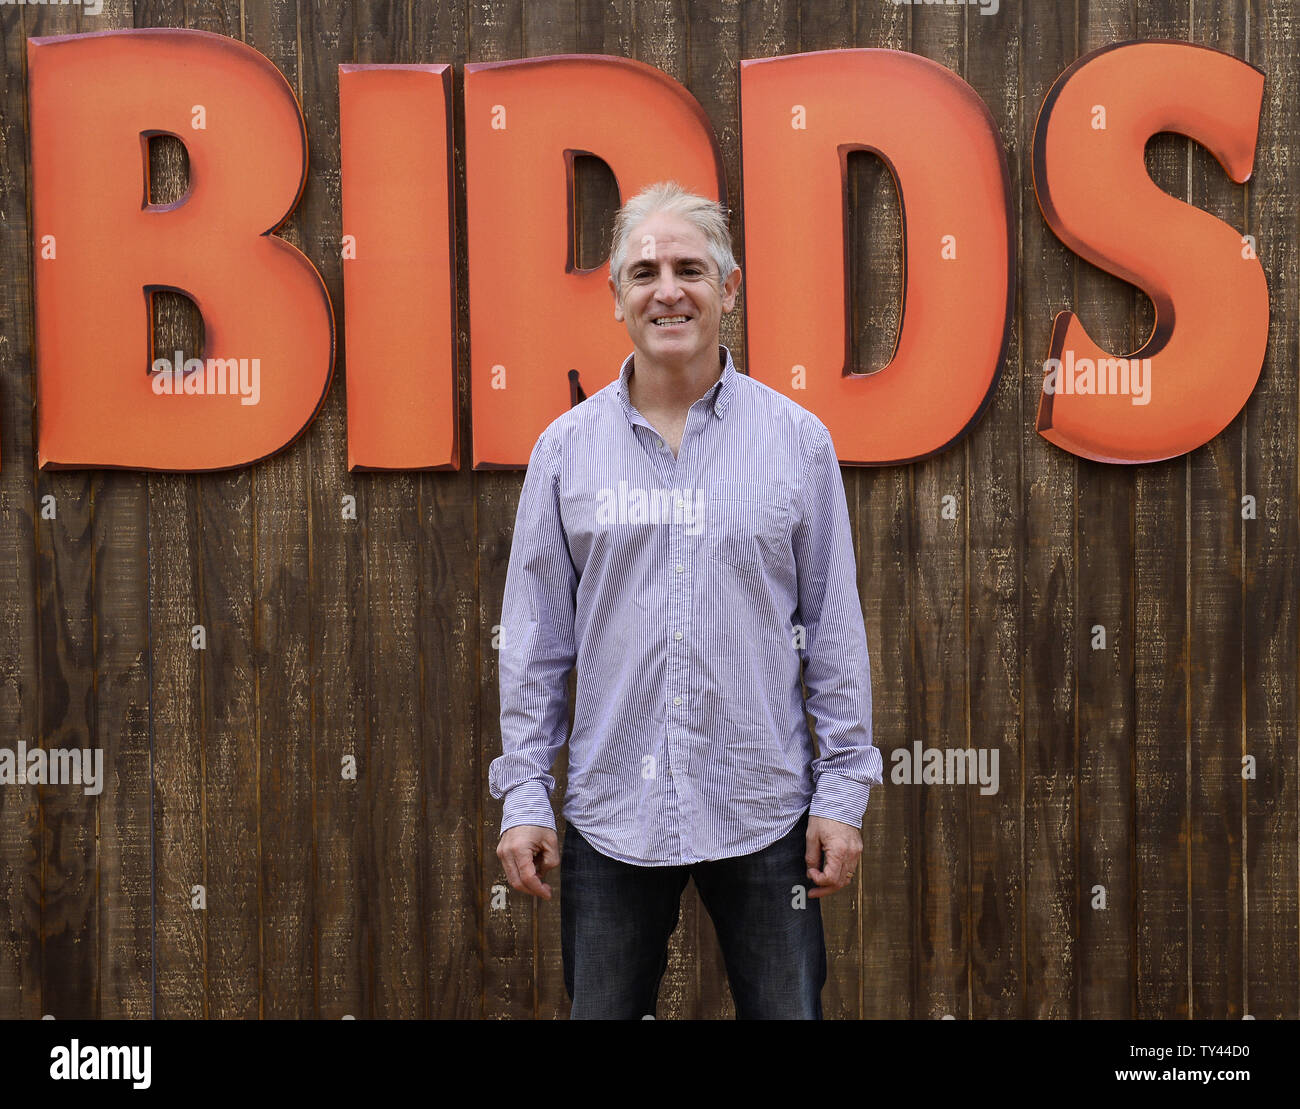 Cast member Carlos Alazraqui, the voice of Amos in the animated motion picture comedy 'Free Birds' attends the premiere of the film at the Westwood Village Theatre in Los Angeles on October 13, 2013. In the film, two turkeys from opposite sides of the tracks must put aside their differences and team up to travel back in time to change the course of history - and get turkey off the holiday menu for good.   UPI/Jim Ruymen Stock Photo